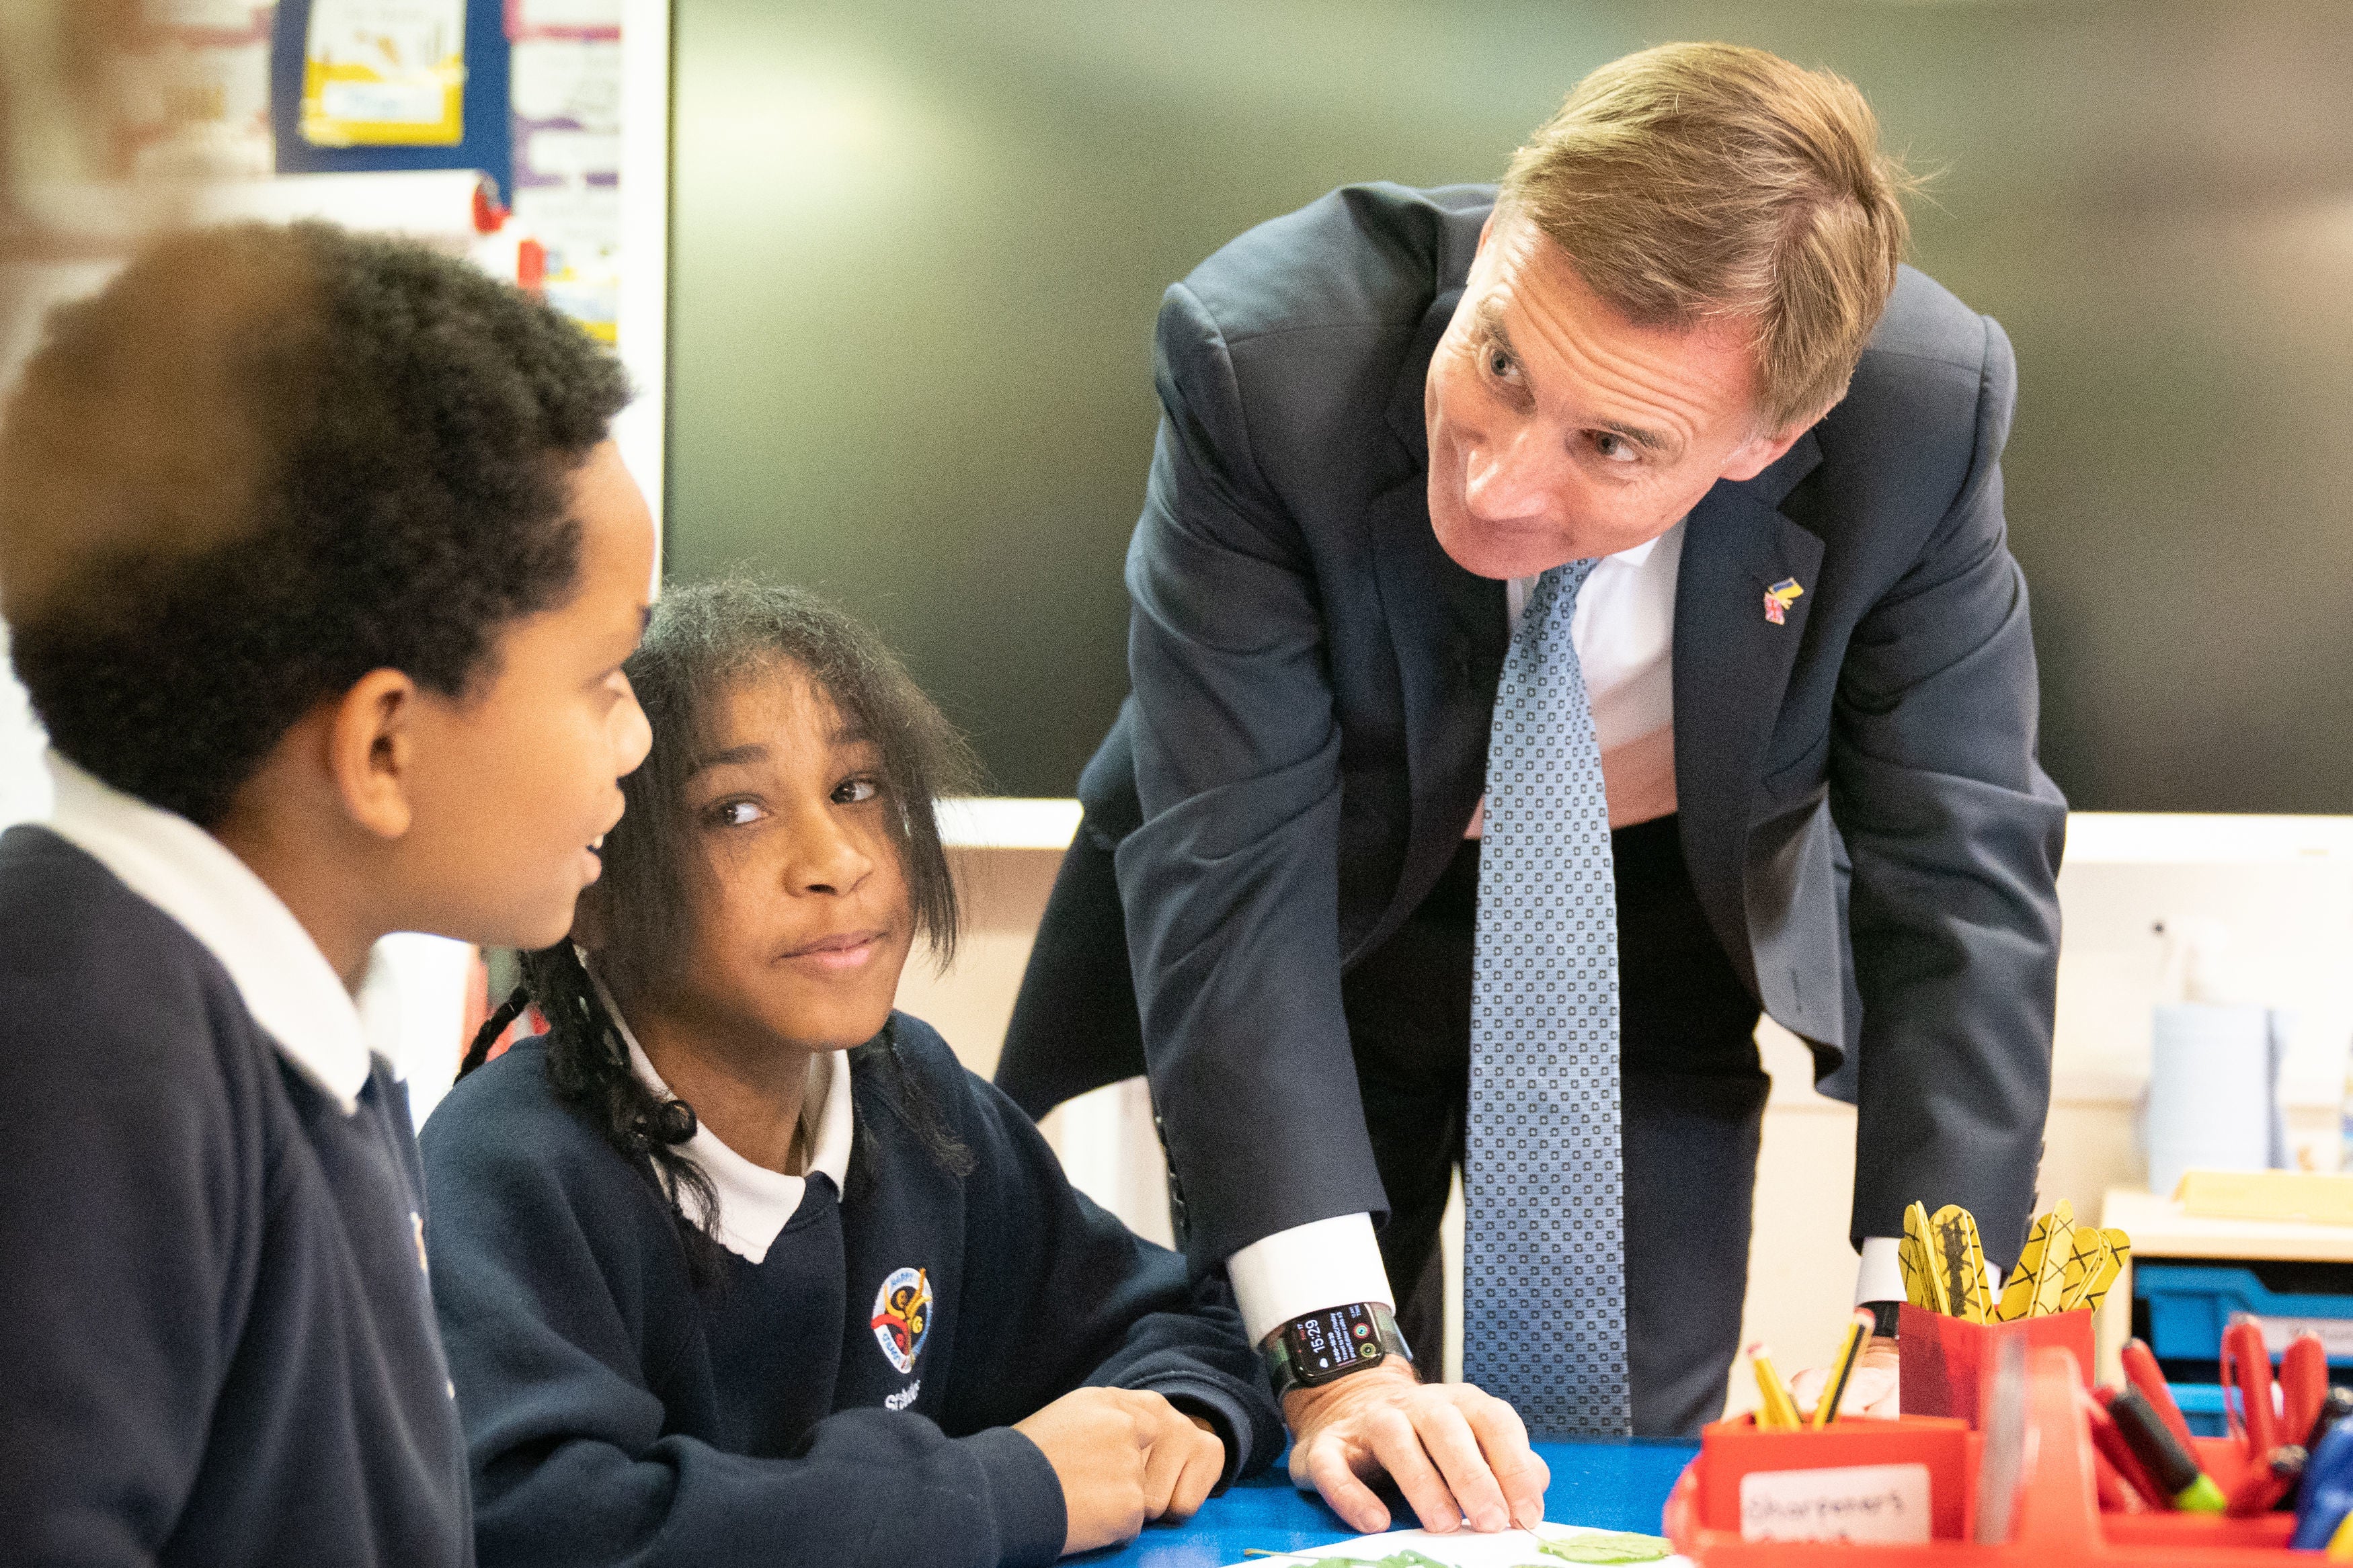 After delivering his autumn statement, Jeremy Hunt met pupils at St Jude’s Church of England Primary School in south London